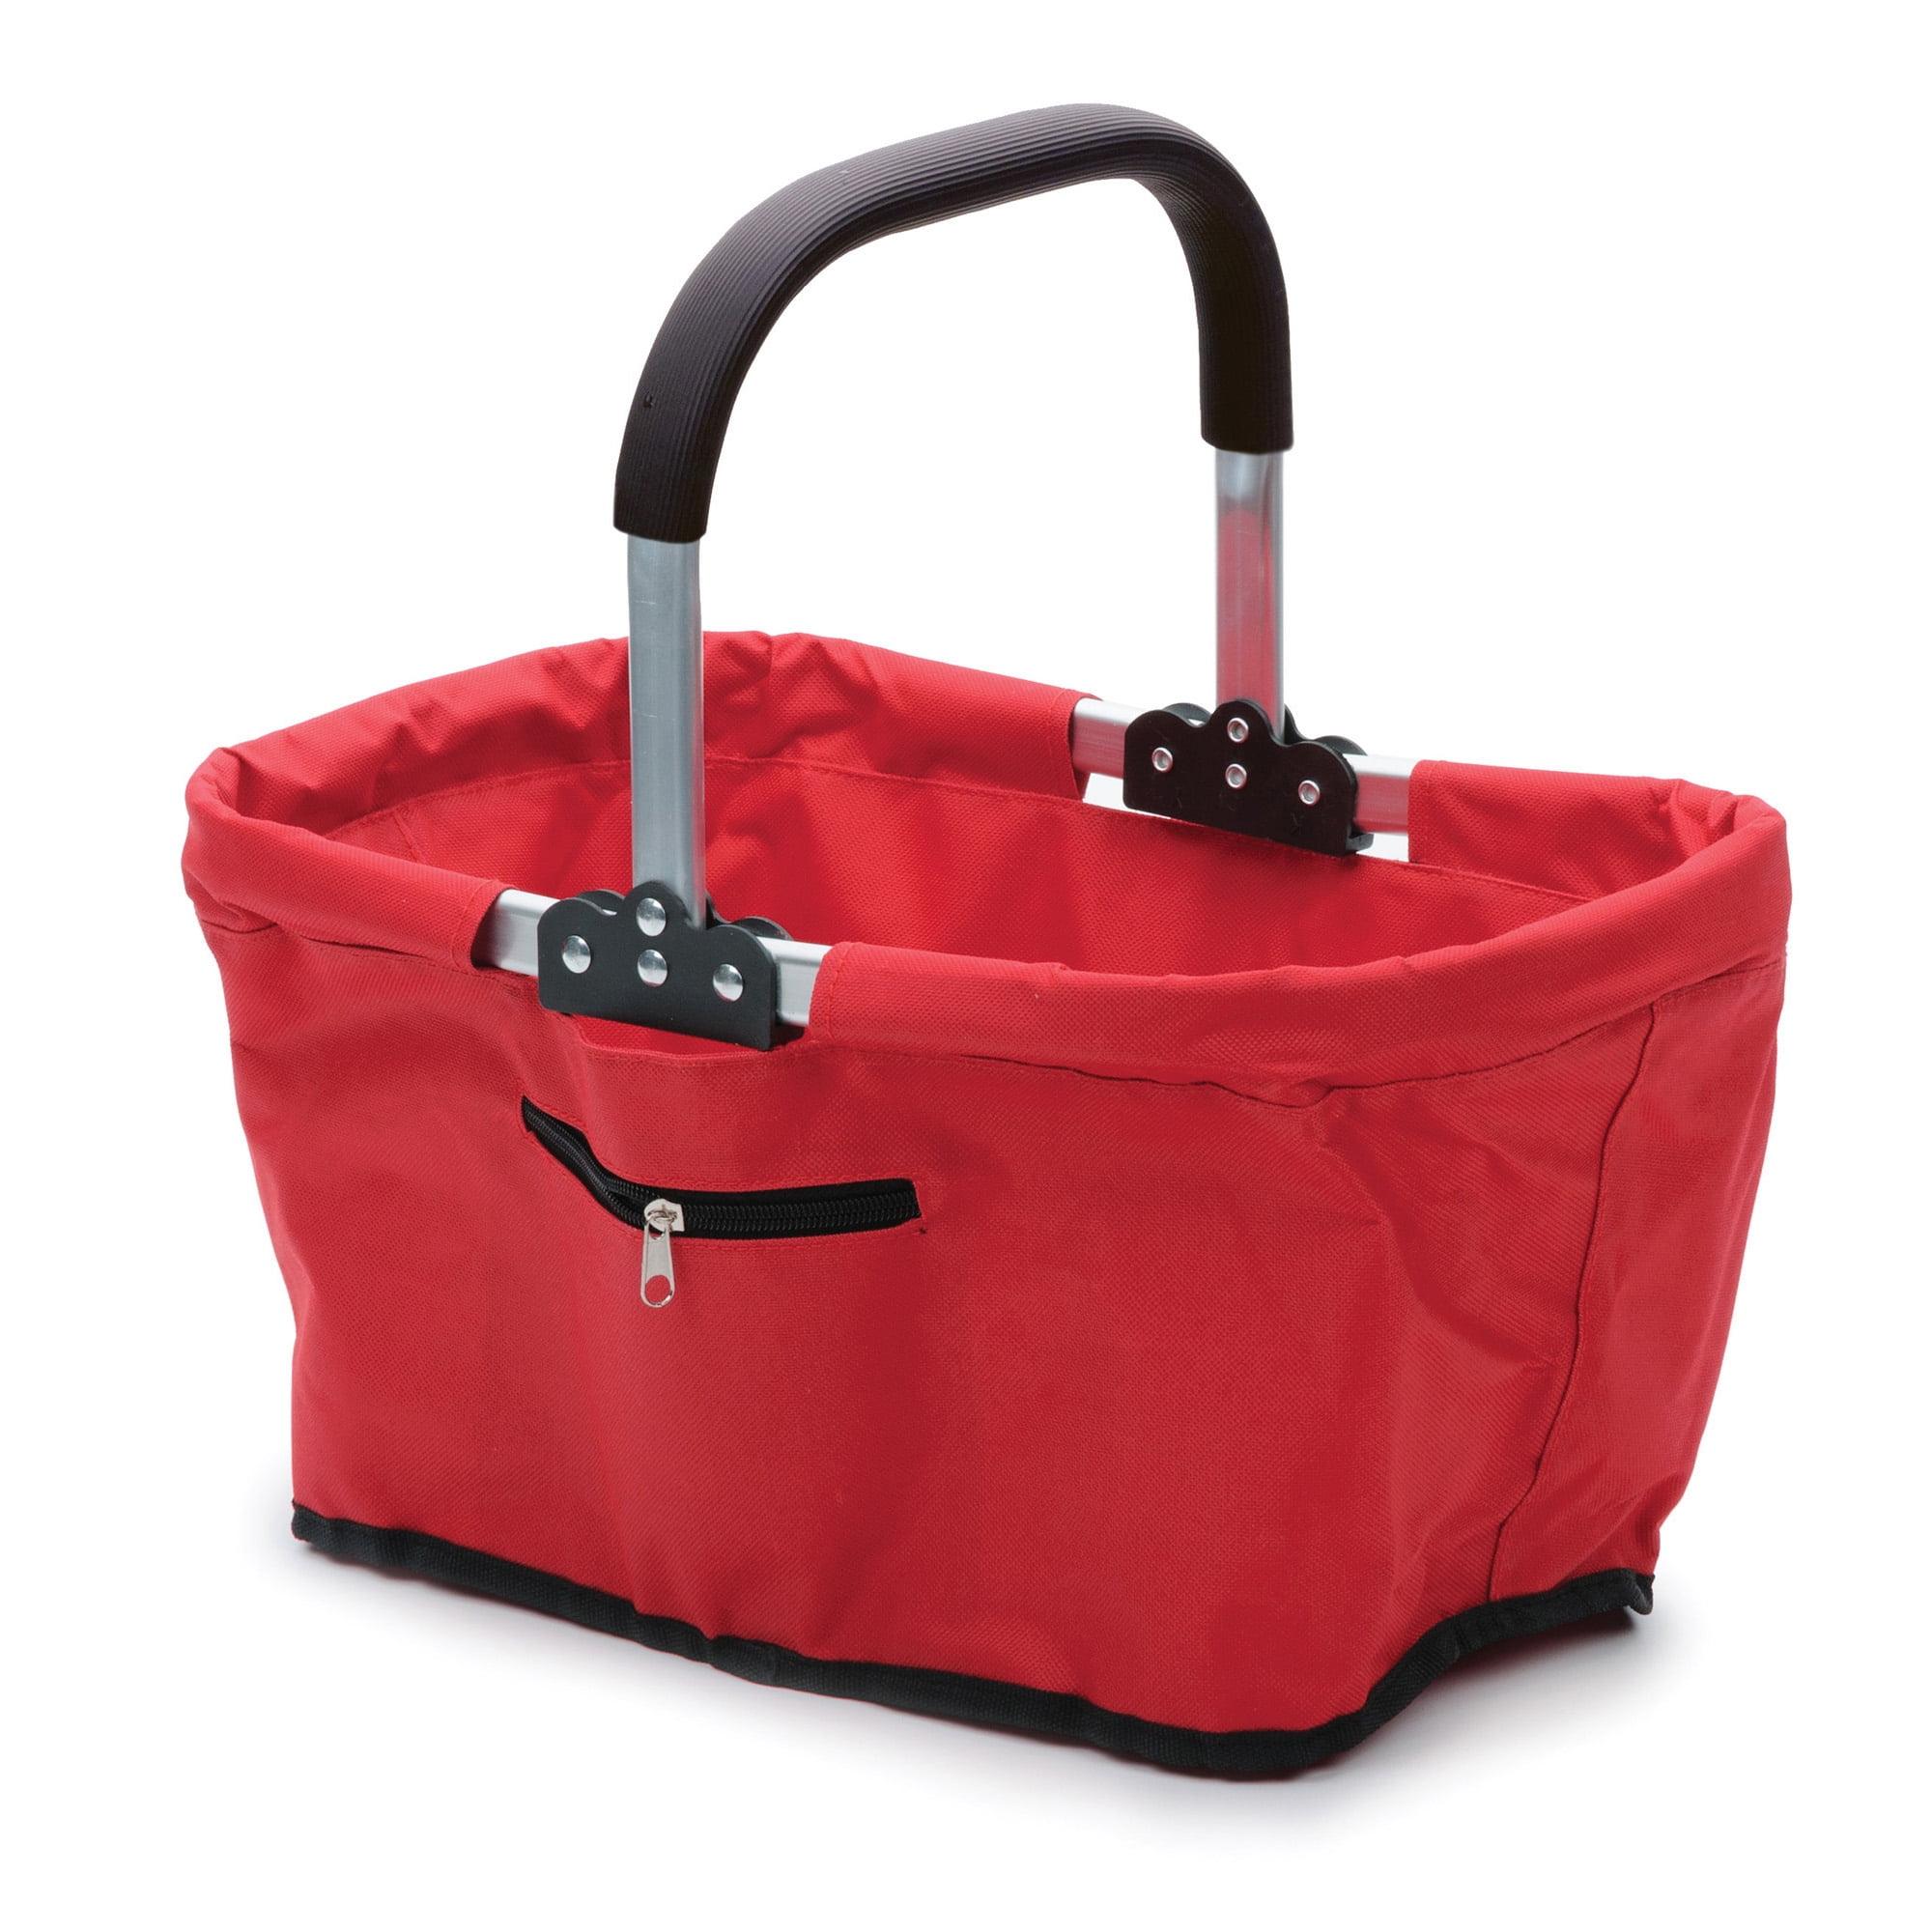 GatherMate Collapsible Red Polyester Market Basket with Aluminum Frame